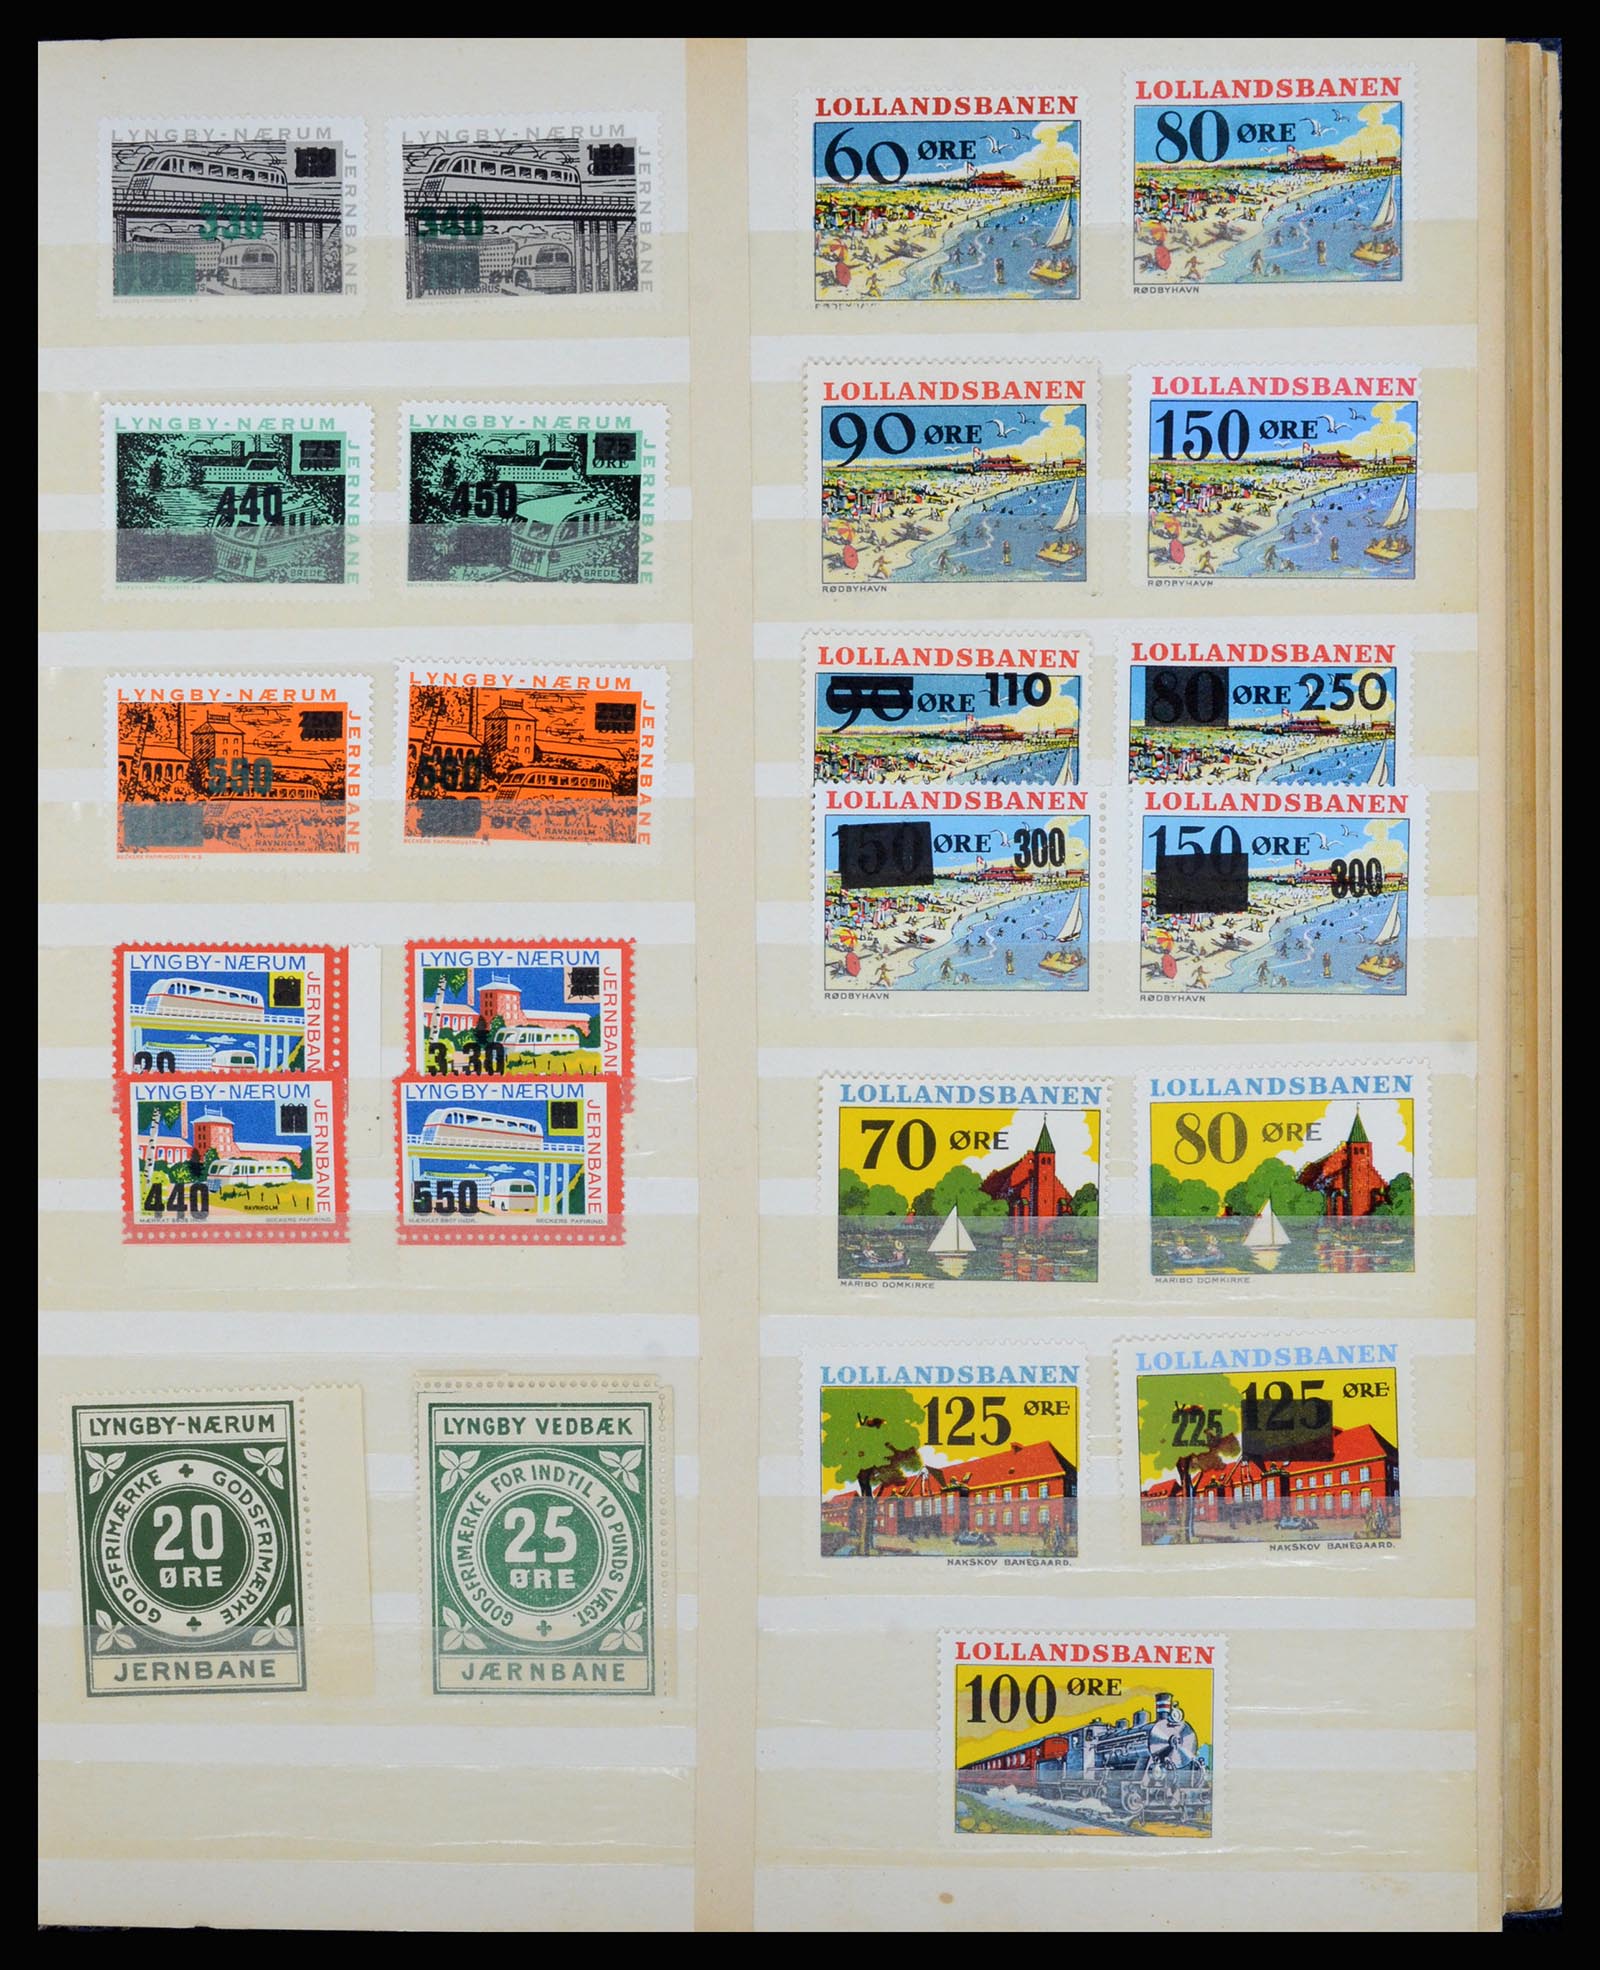 36767 013 - Stamp collection 36767 Denmark railroadstamps.